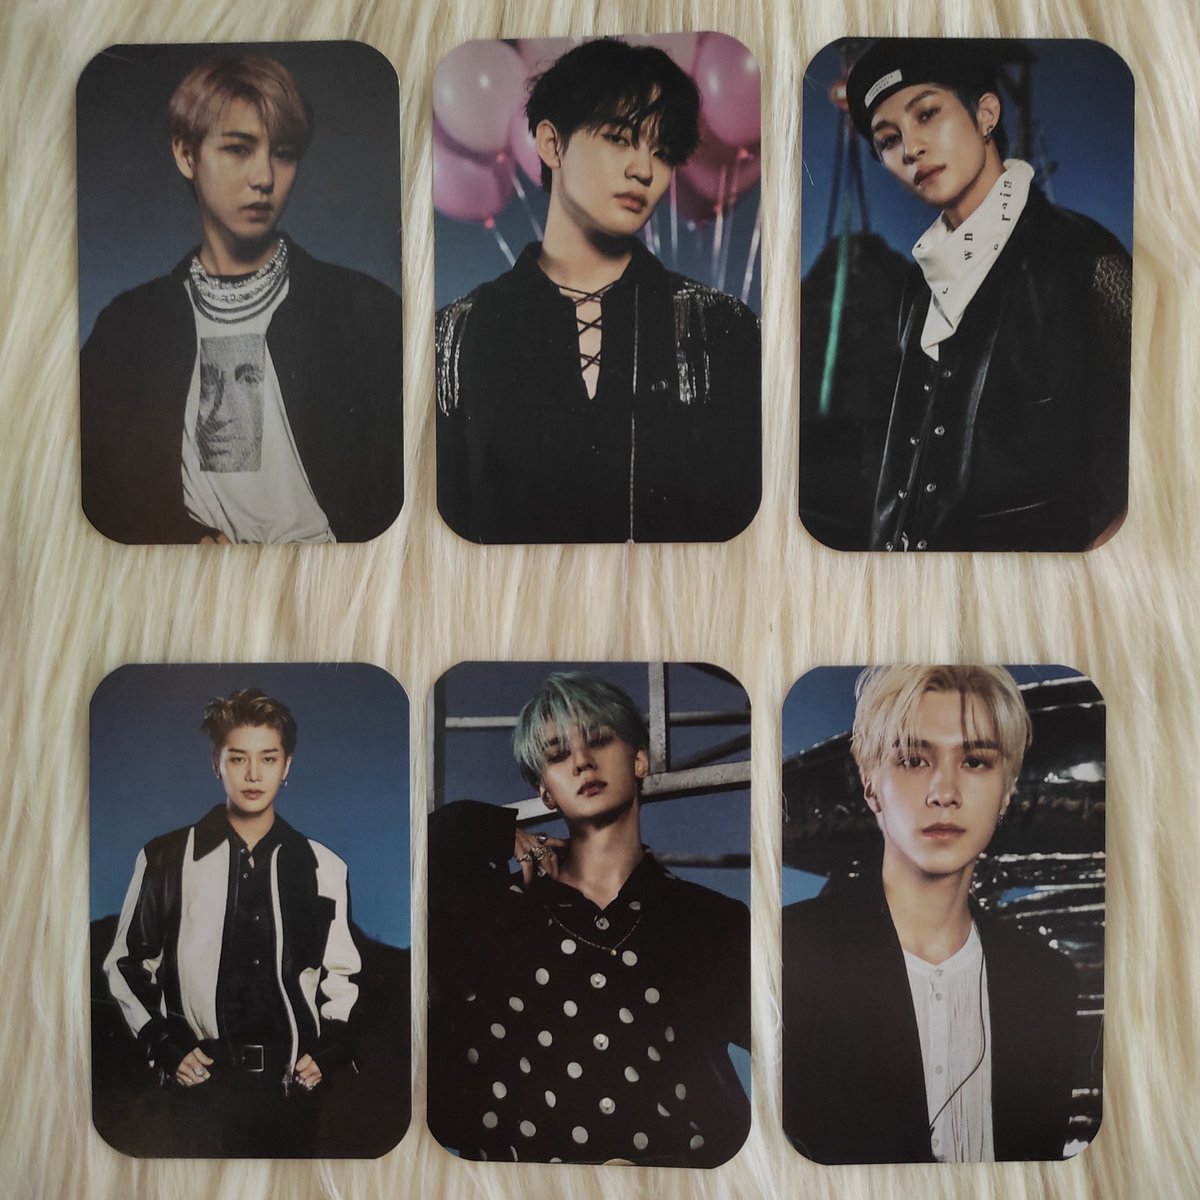 WTS/LFB NCT PHResonance Exclusive PC Set - 110php eachAvailable members:TaeilKunHenderyRenjunYangyangChenleAll in mint condition! Please DM me for questions about any items in this thread 